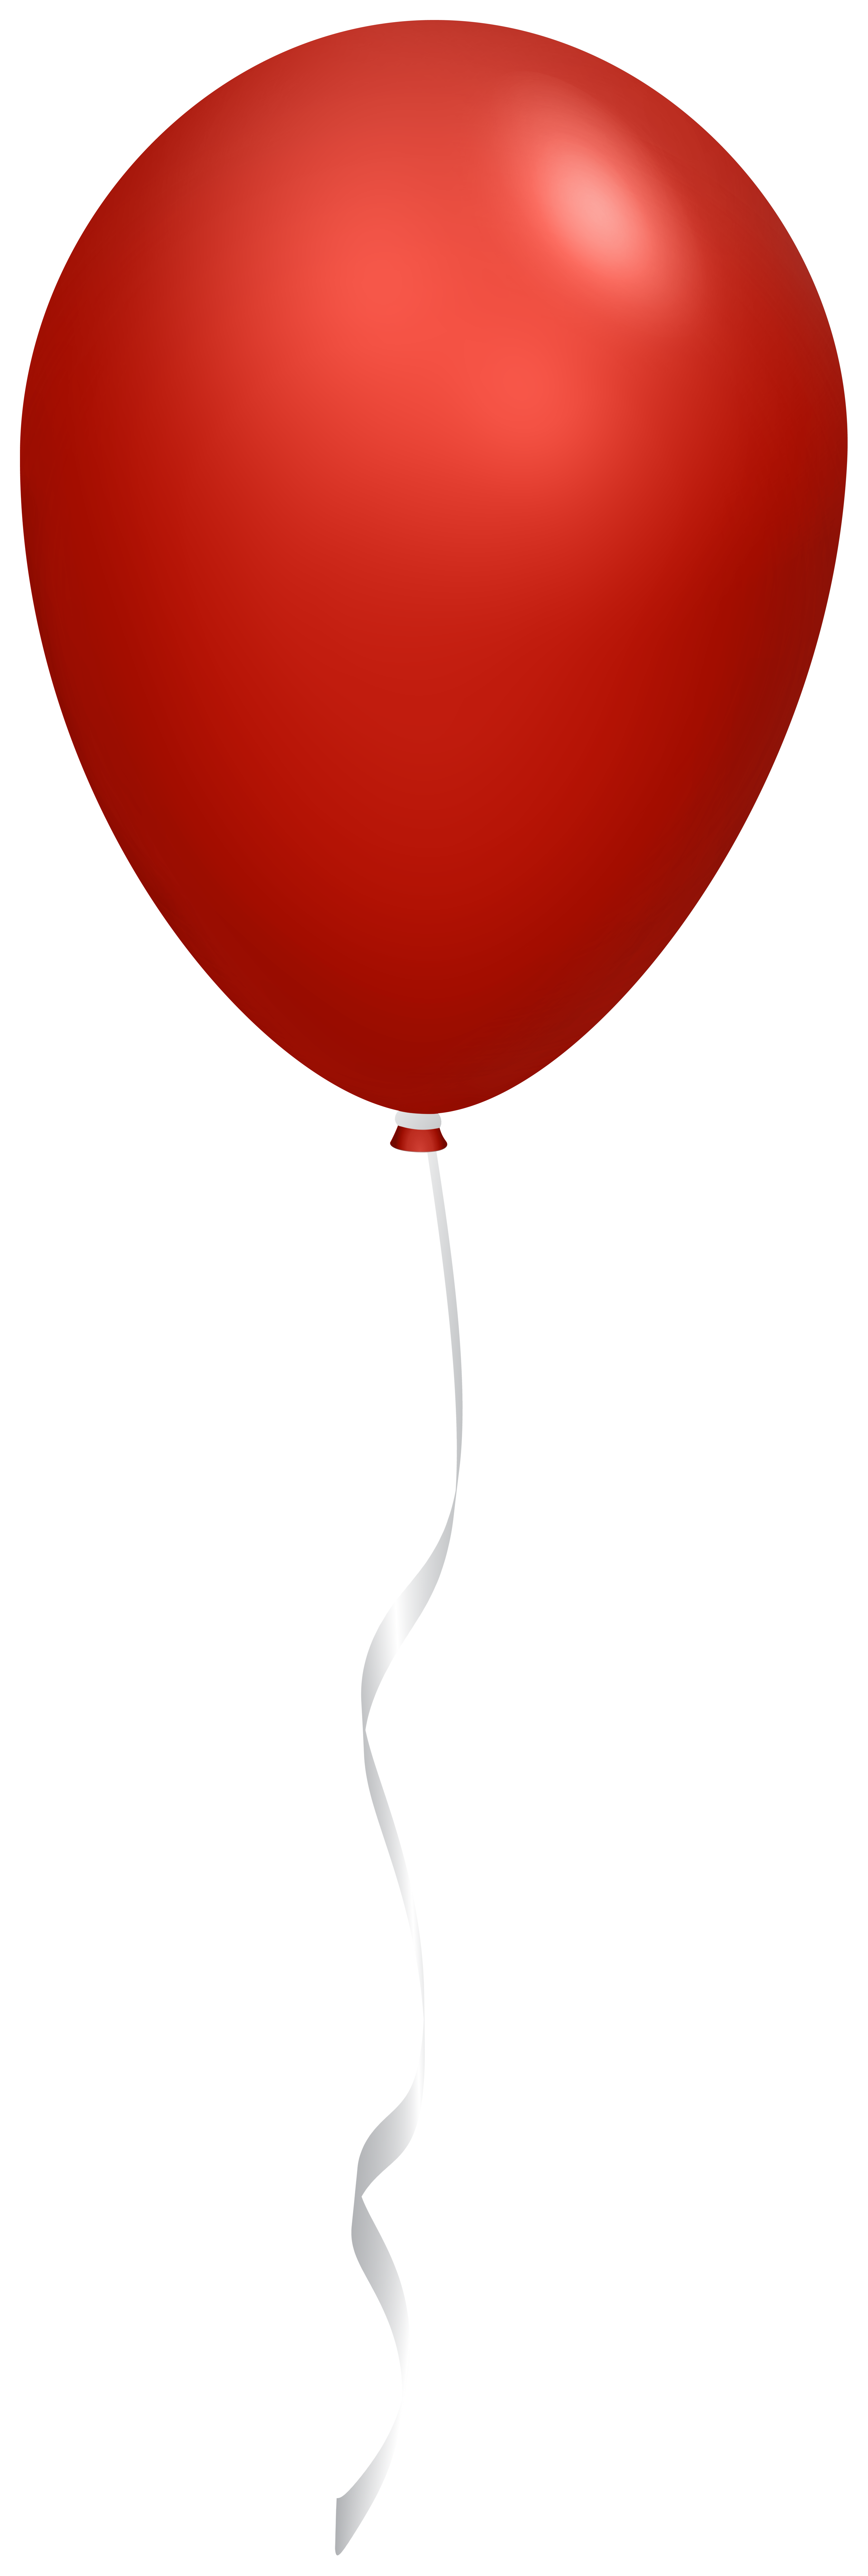 Single Red Balloon Transparent PNG Clipart | Gallery Yopriceville ...